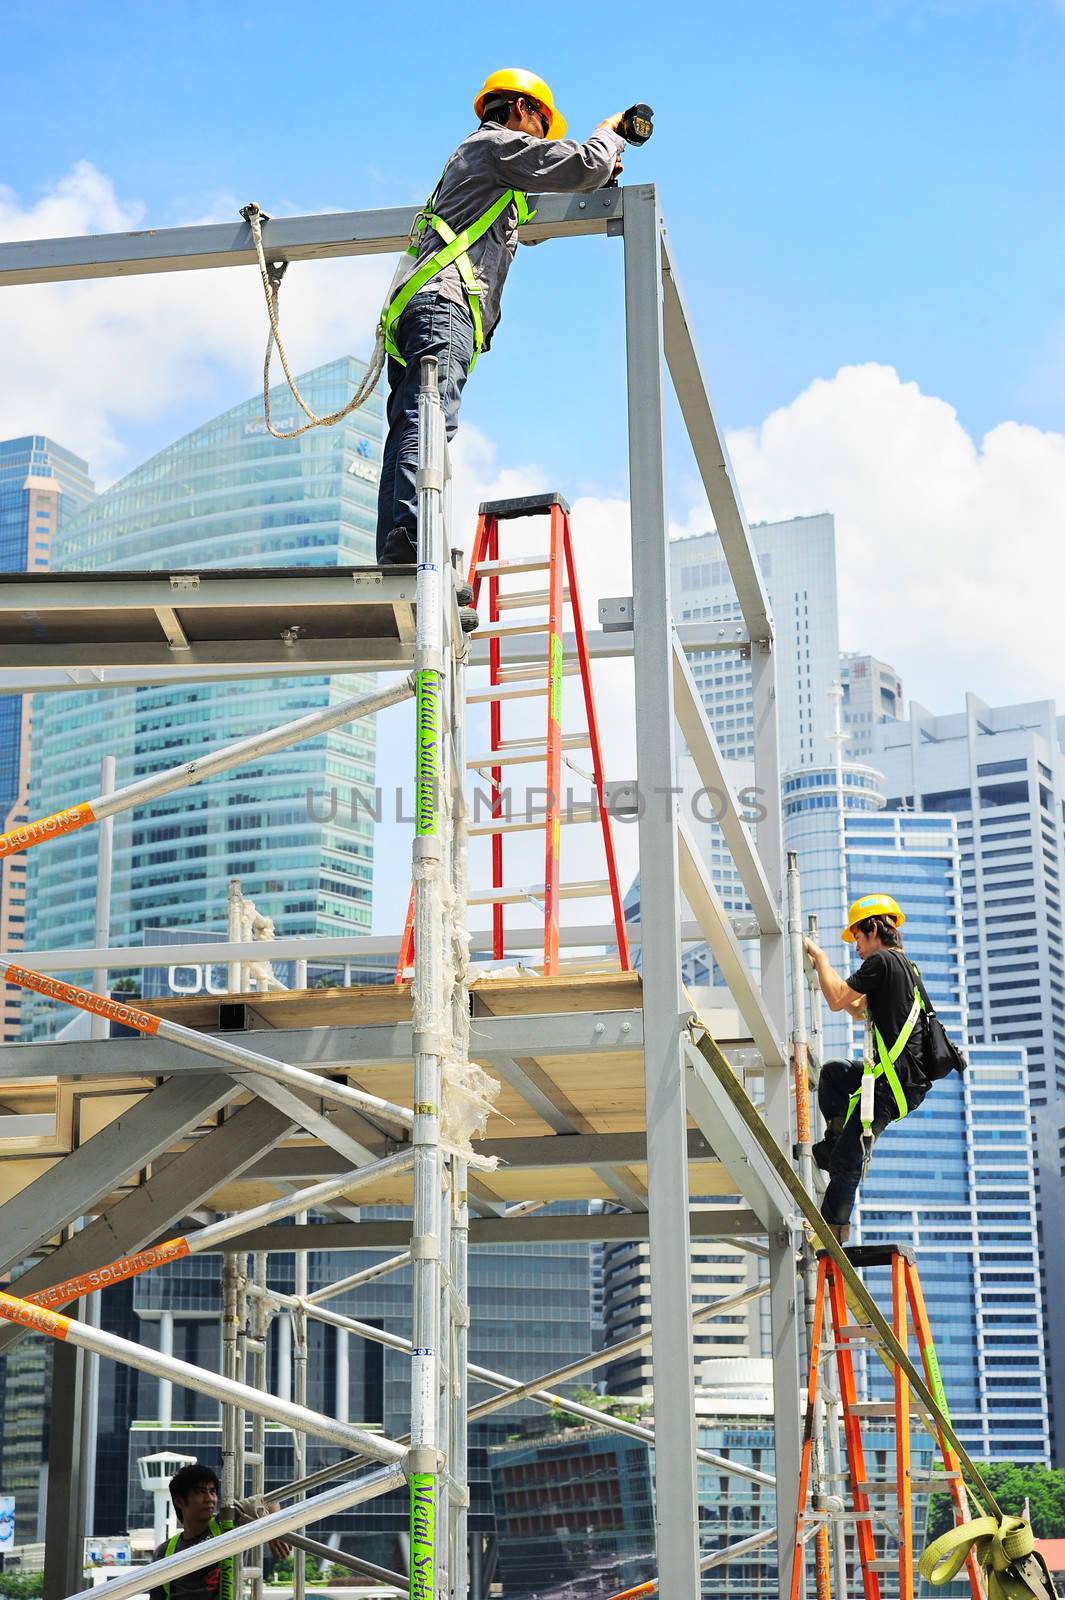 Singapore, Republic of Singapore - May 09, 2013: Workers at construction site in front of Singapore downtown. Construction industry is expected to pull in some S$30 billion this year